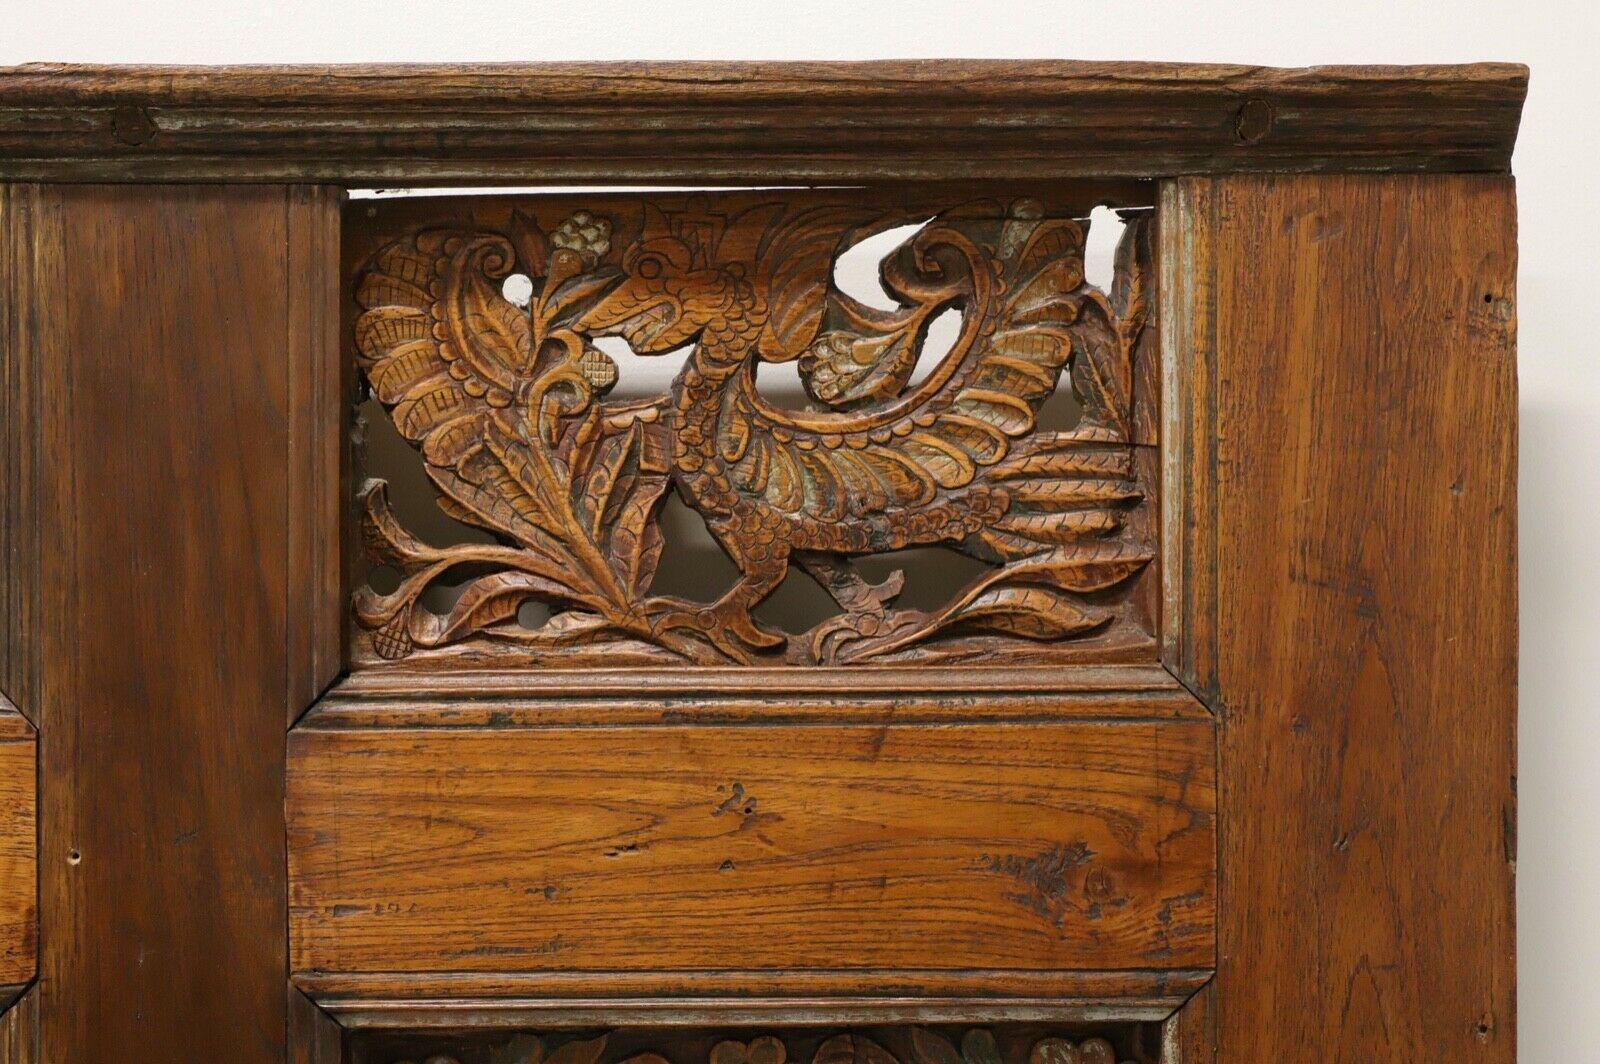 Chinoiserie Antique Thai Carved Panel with Doors - Use as Headboard, Room Divider, Wall Art